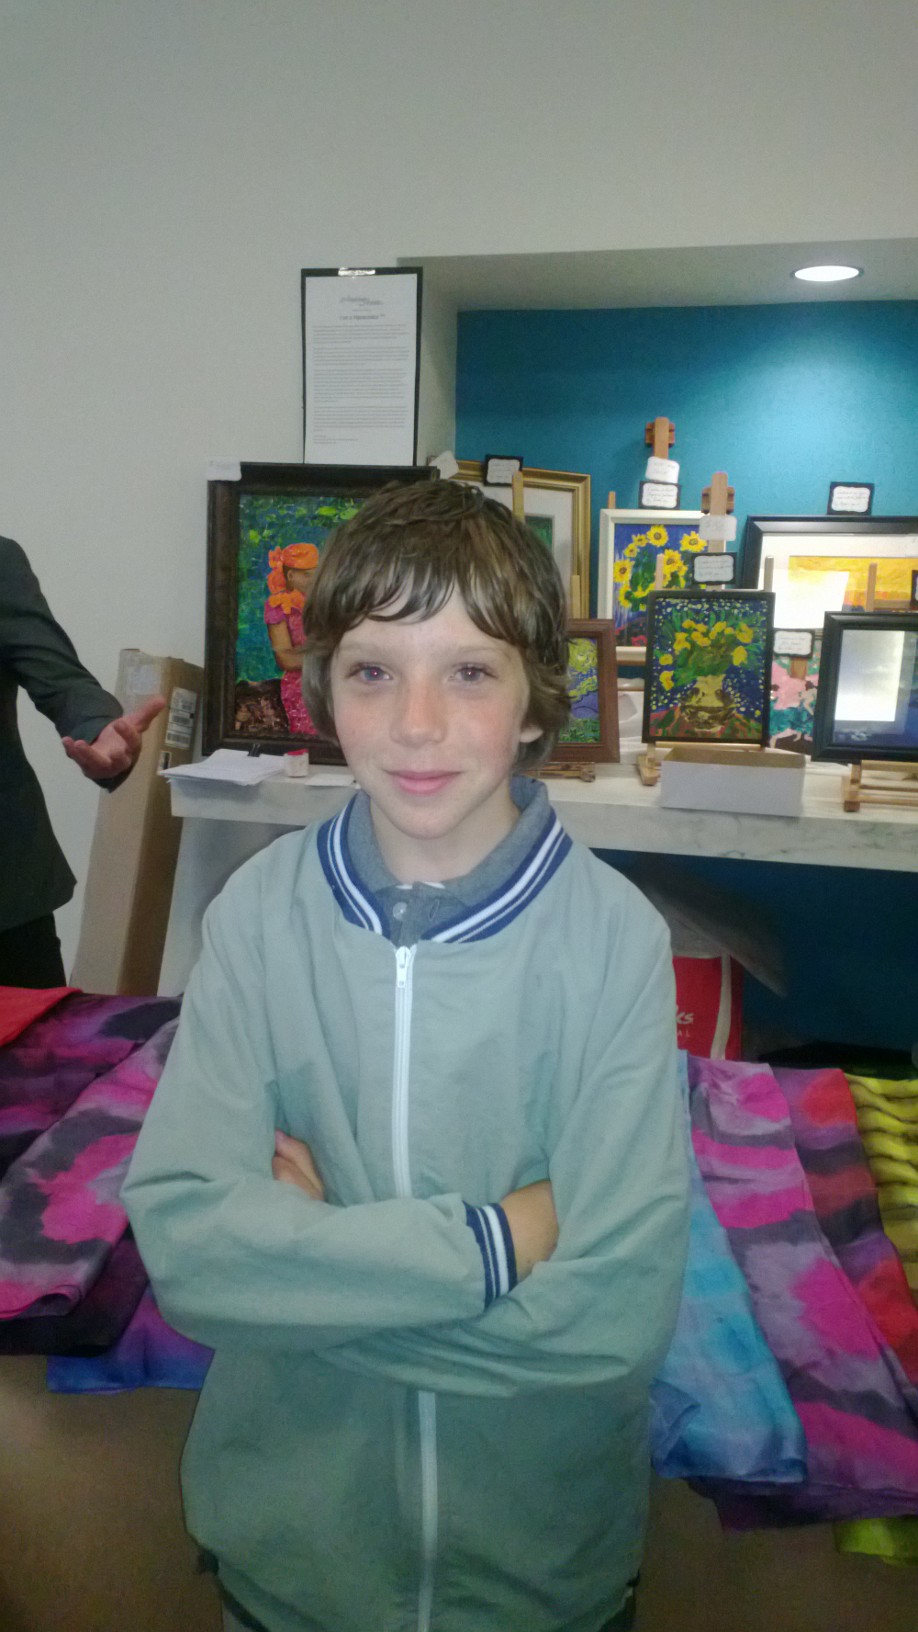 Aidan uses his artistic talents to help children in need by participating in the U.N. exhibit.